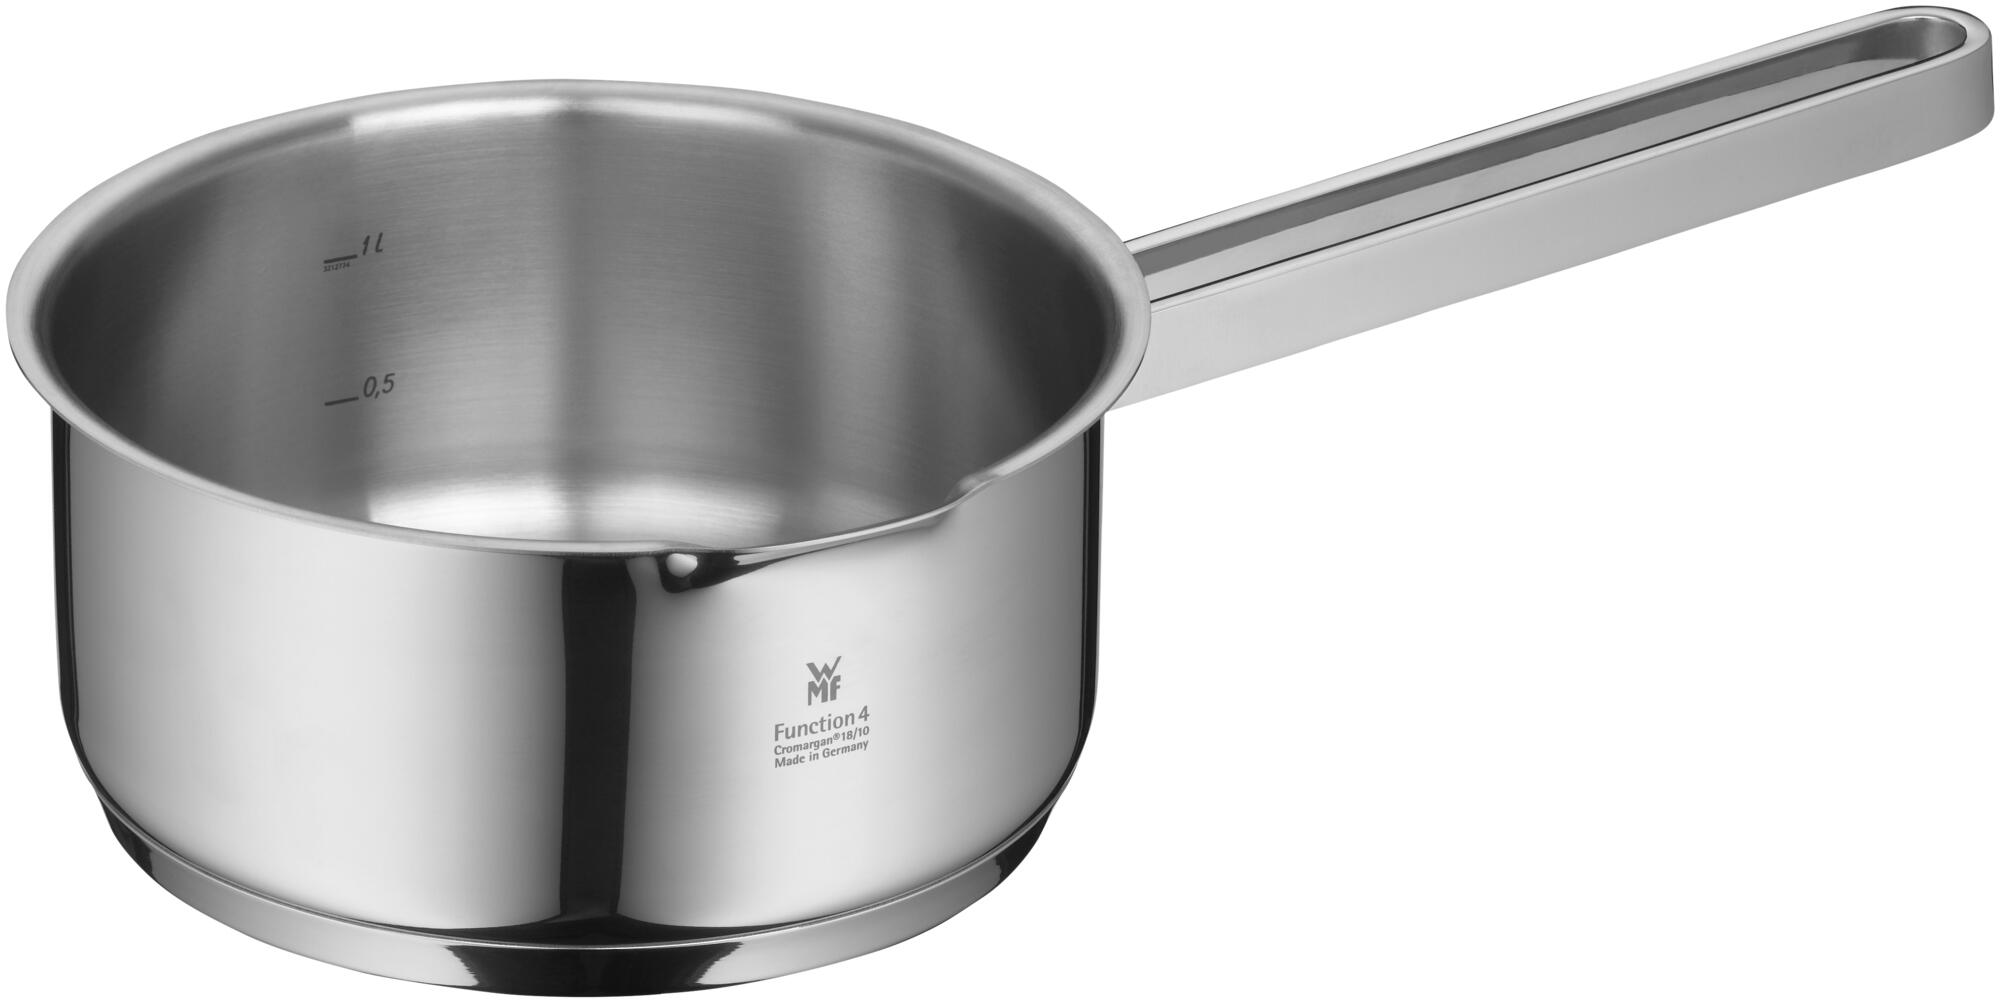 Function 4 Saucepan 16 cm without lid